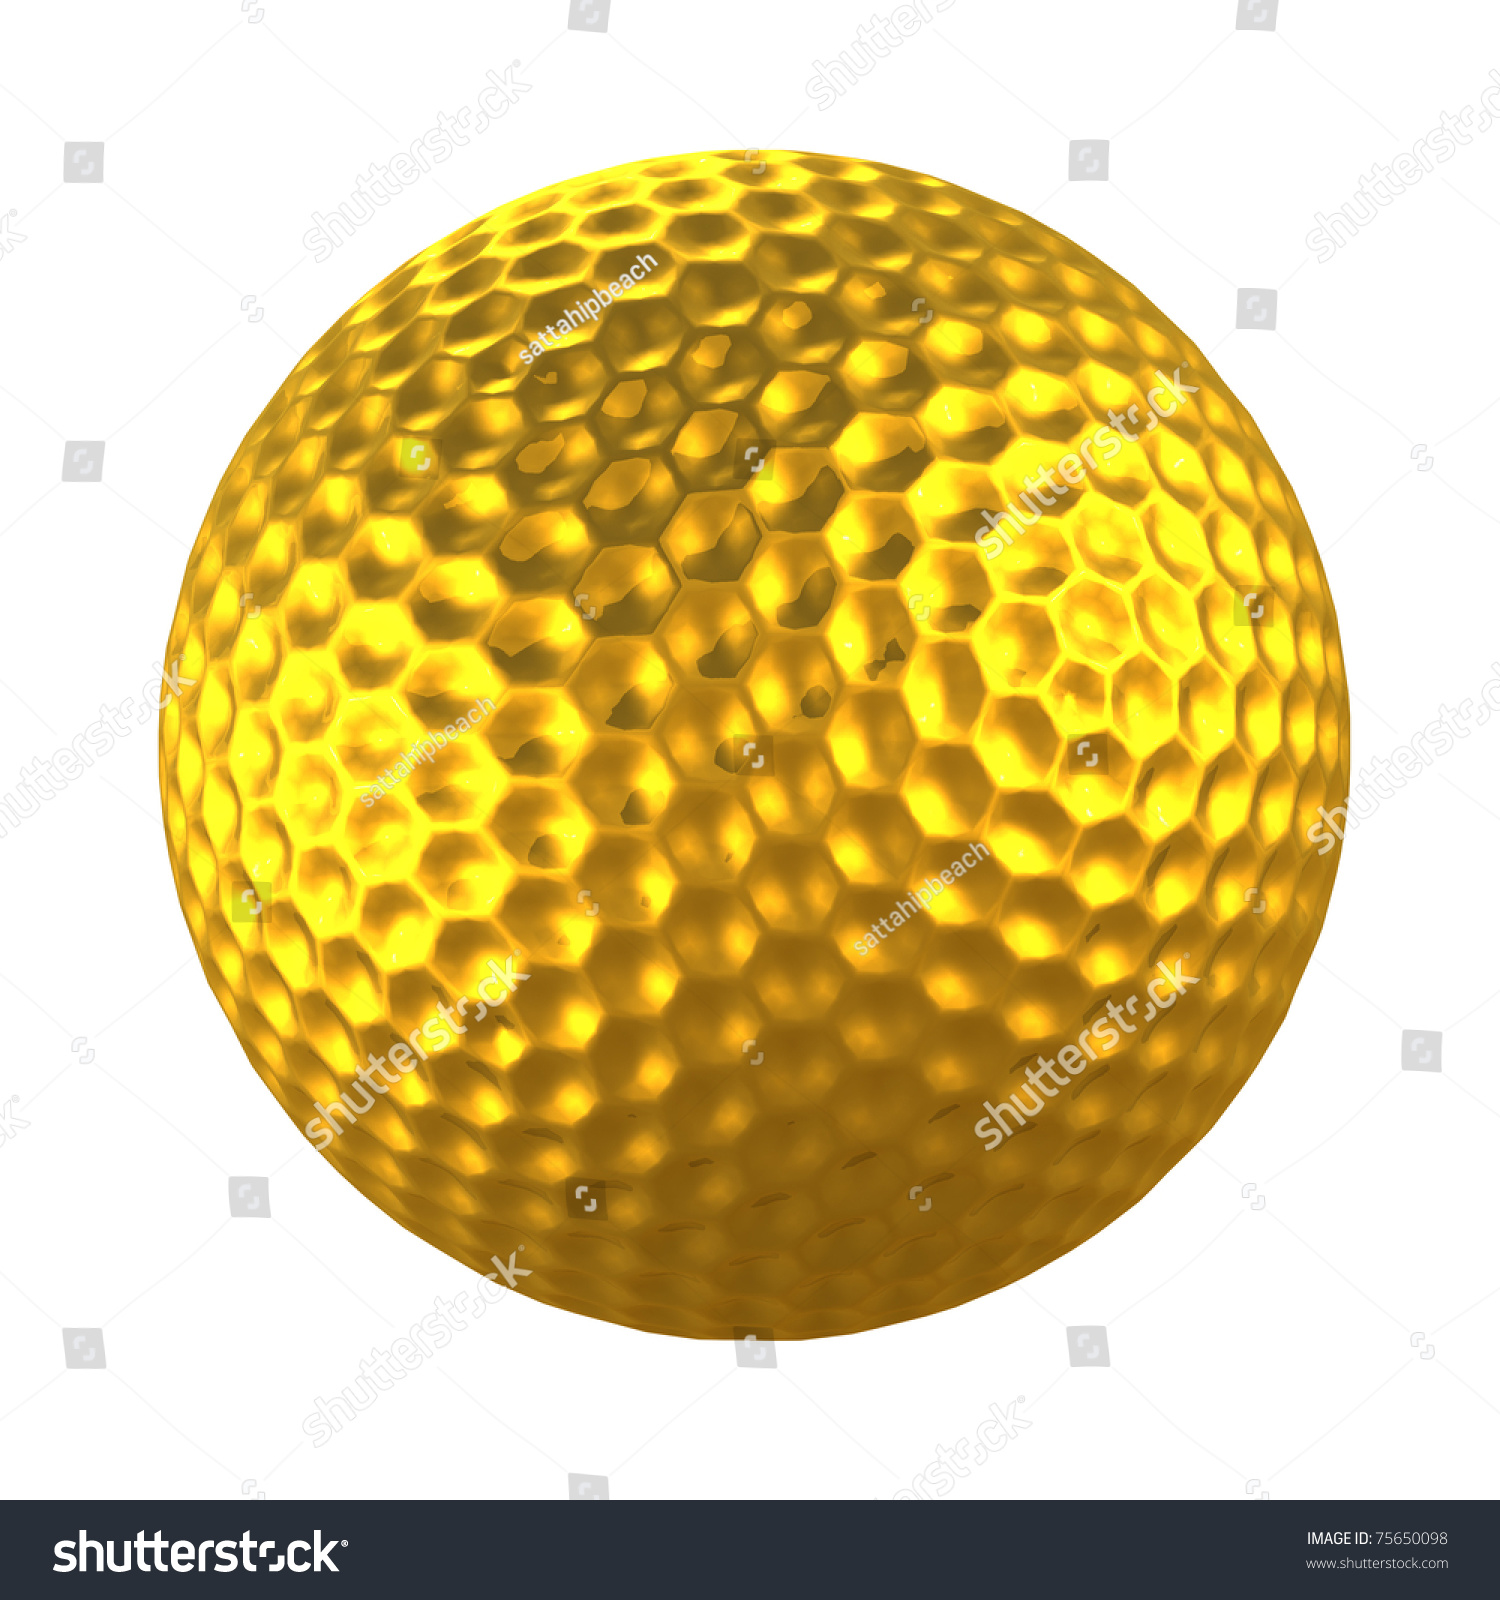 3d Golden Golf Ball In White Isolation Background Stock Photo 75650098 ...